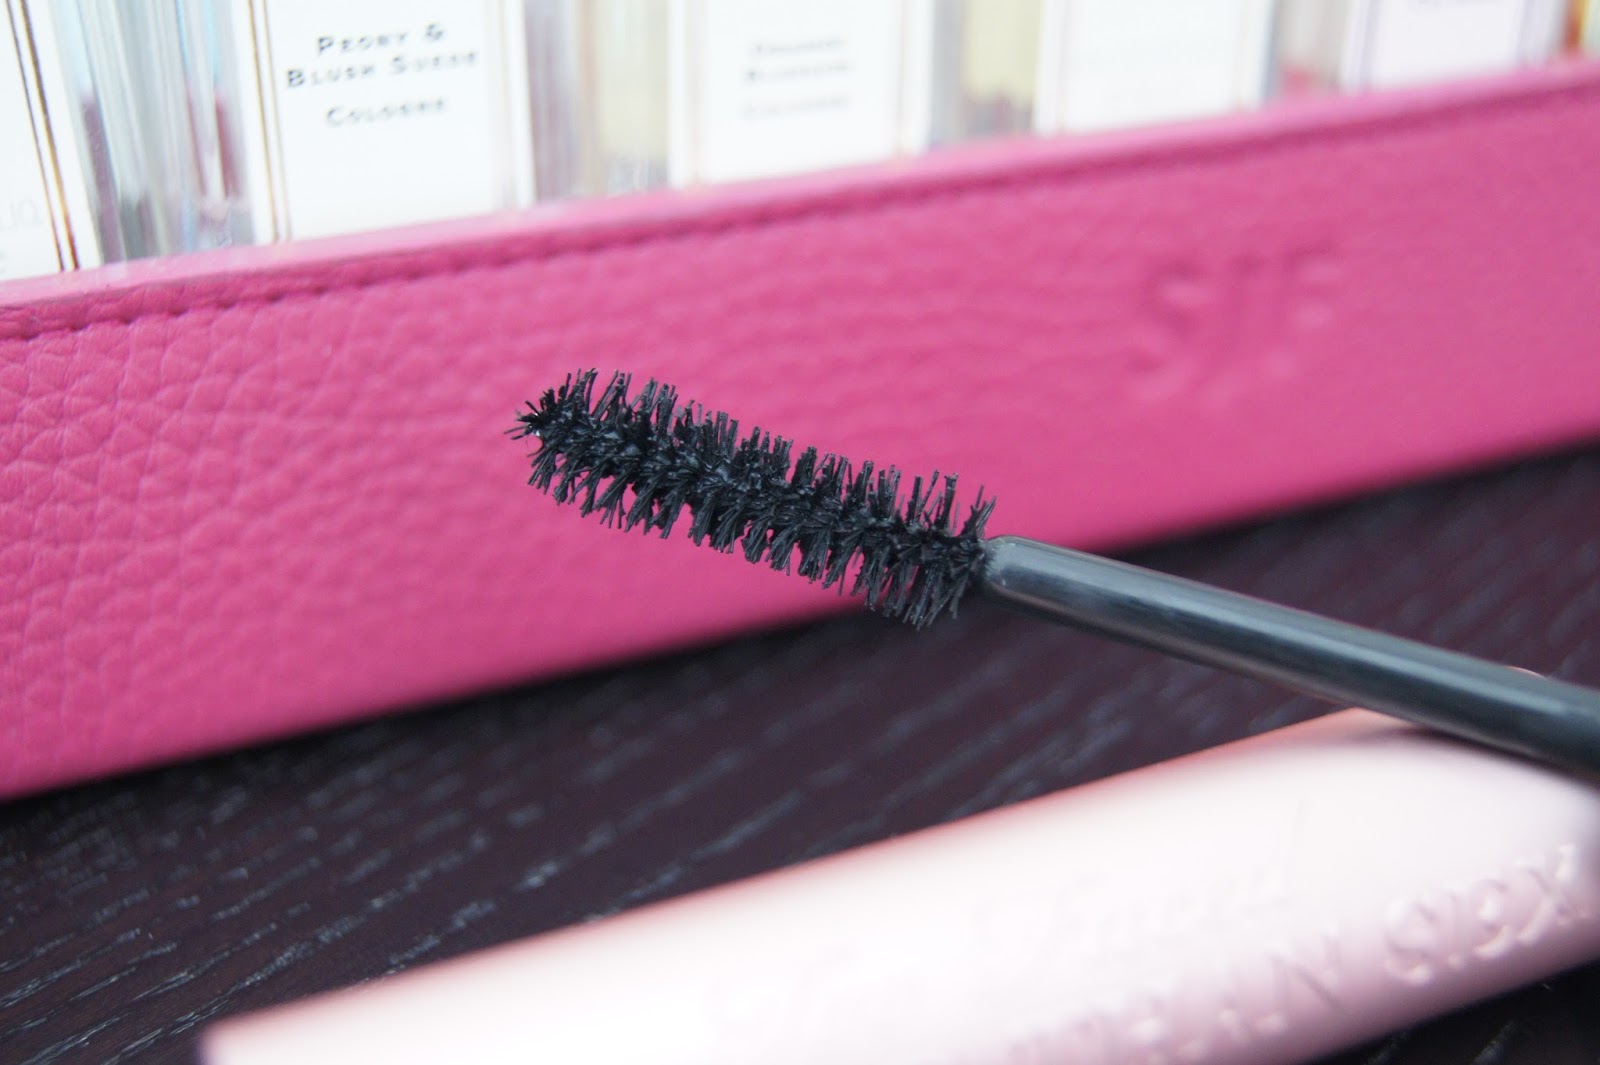 Too Faced Better than Sex mascara review